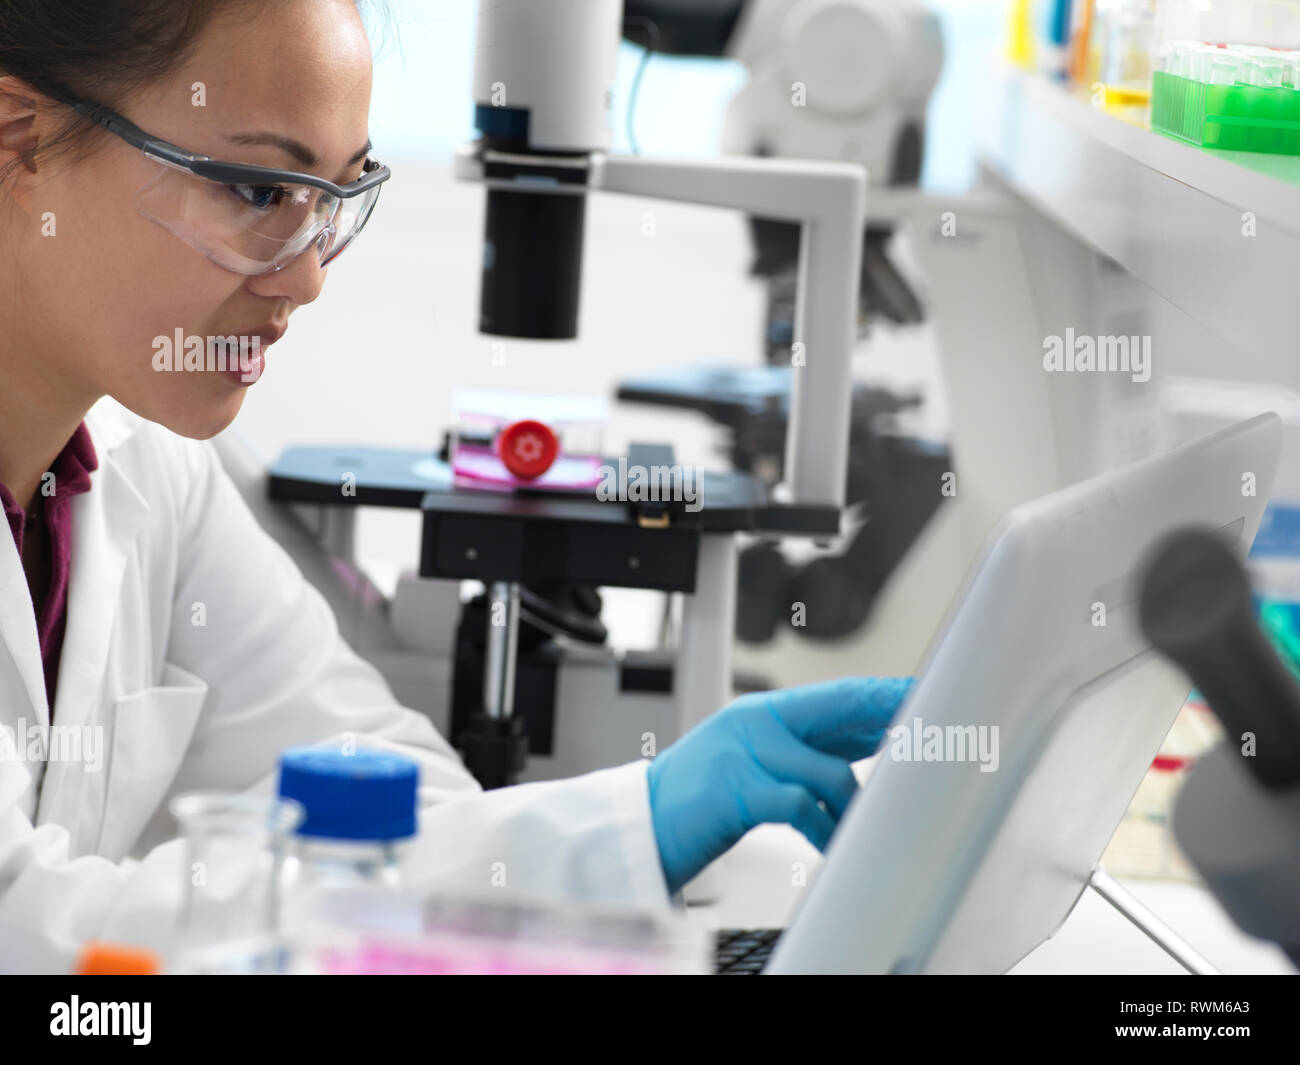 Scientist viewing results on computer during experiment in laboratory Stock Photo